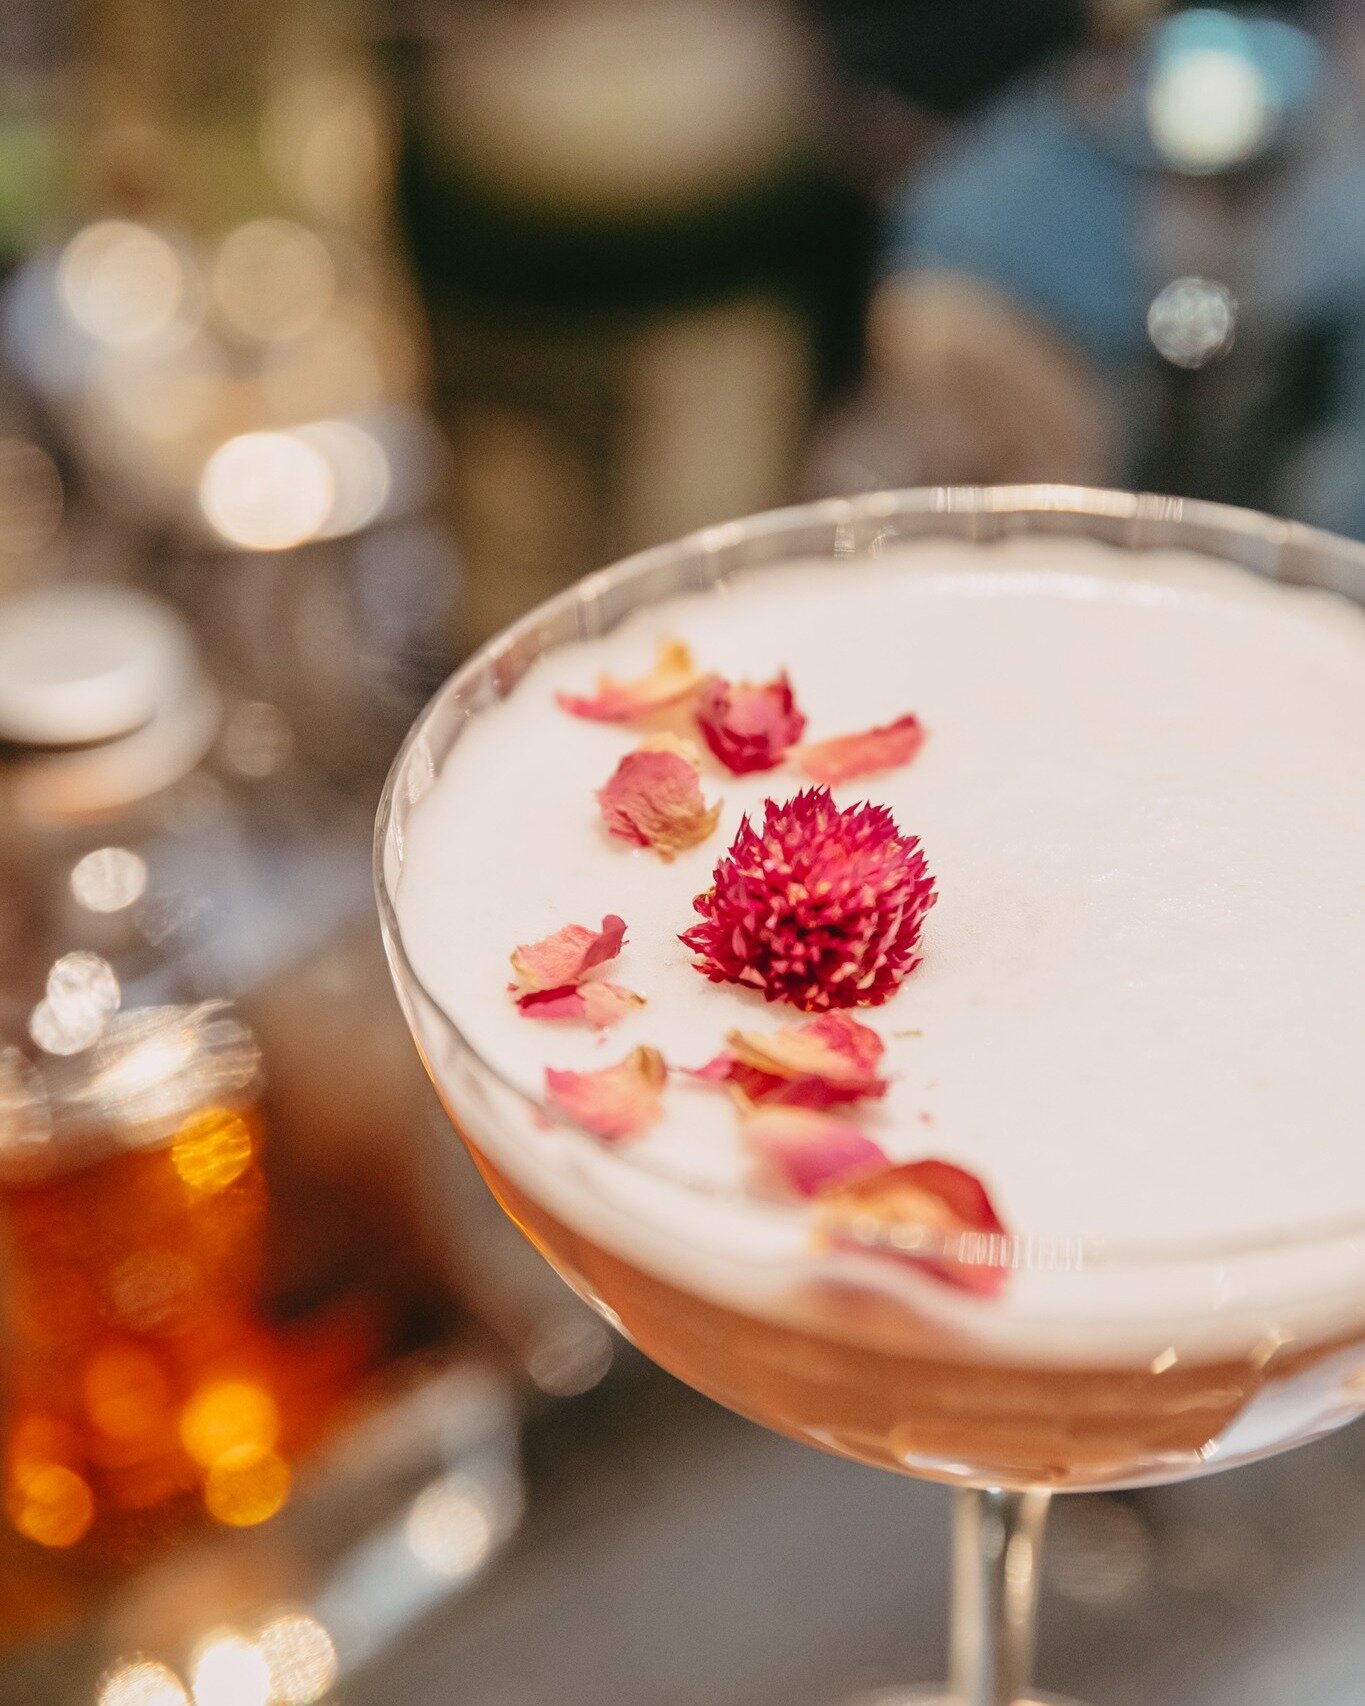 At Maison ELLE is always HAPPY hour!  Try our Maison ELLE signature Cocktail with lovely notes of amaranthine flower, lychee and rose 🍸🌹

-

C'est toujours HAPPY hour &agrave; la Maison ELLE !  Essayez notre cocktail signature Maison ELLE avec de b